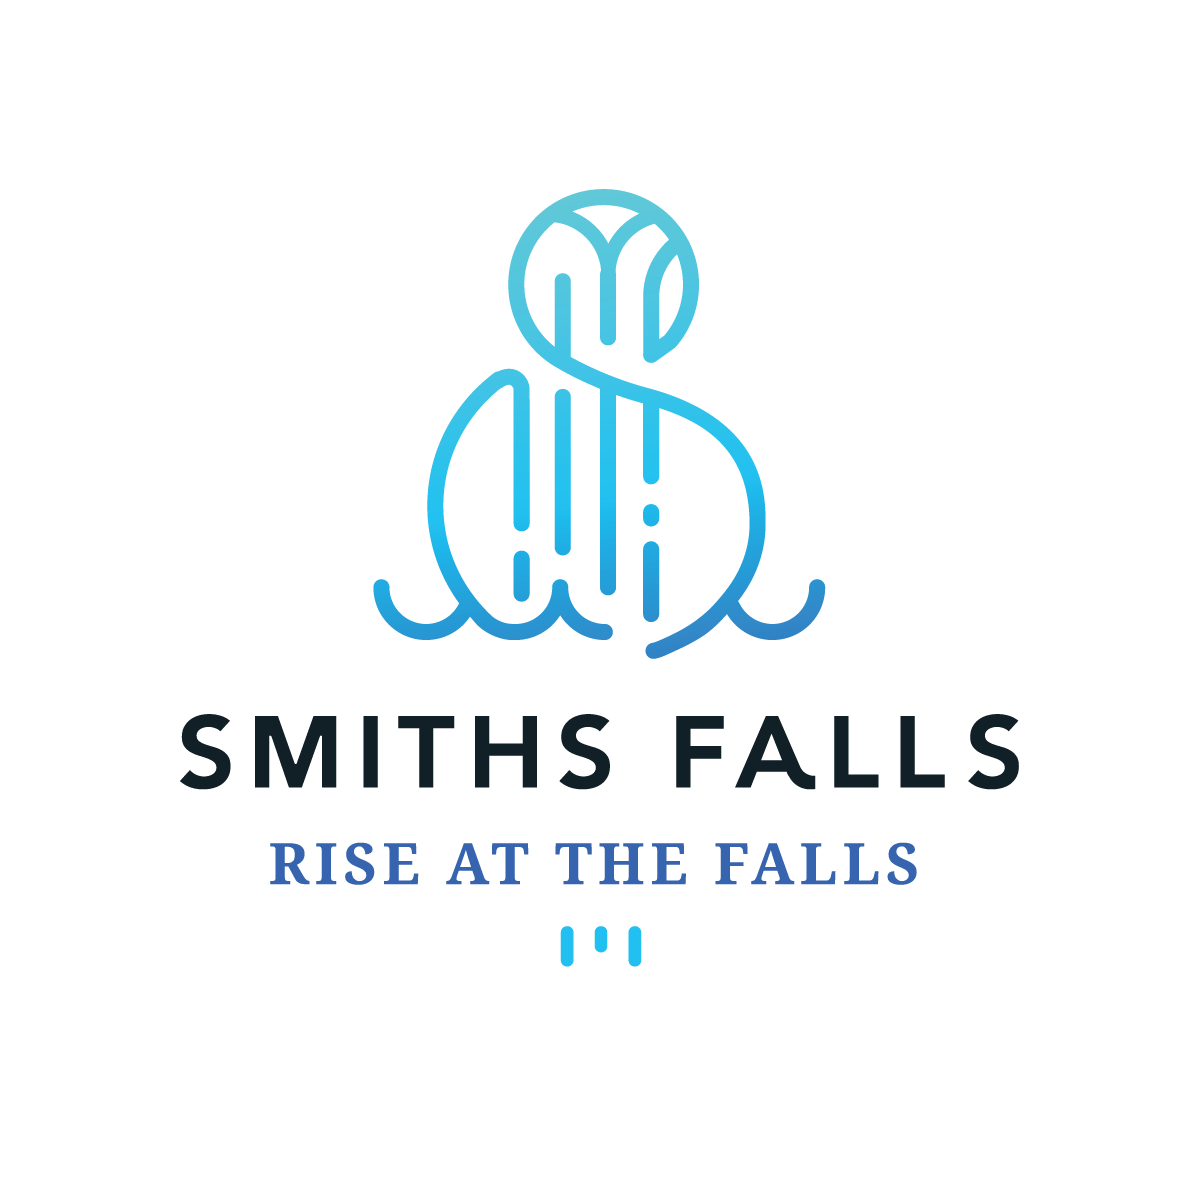 The City of Smiths Falls